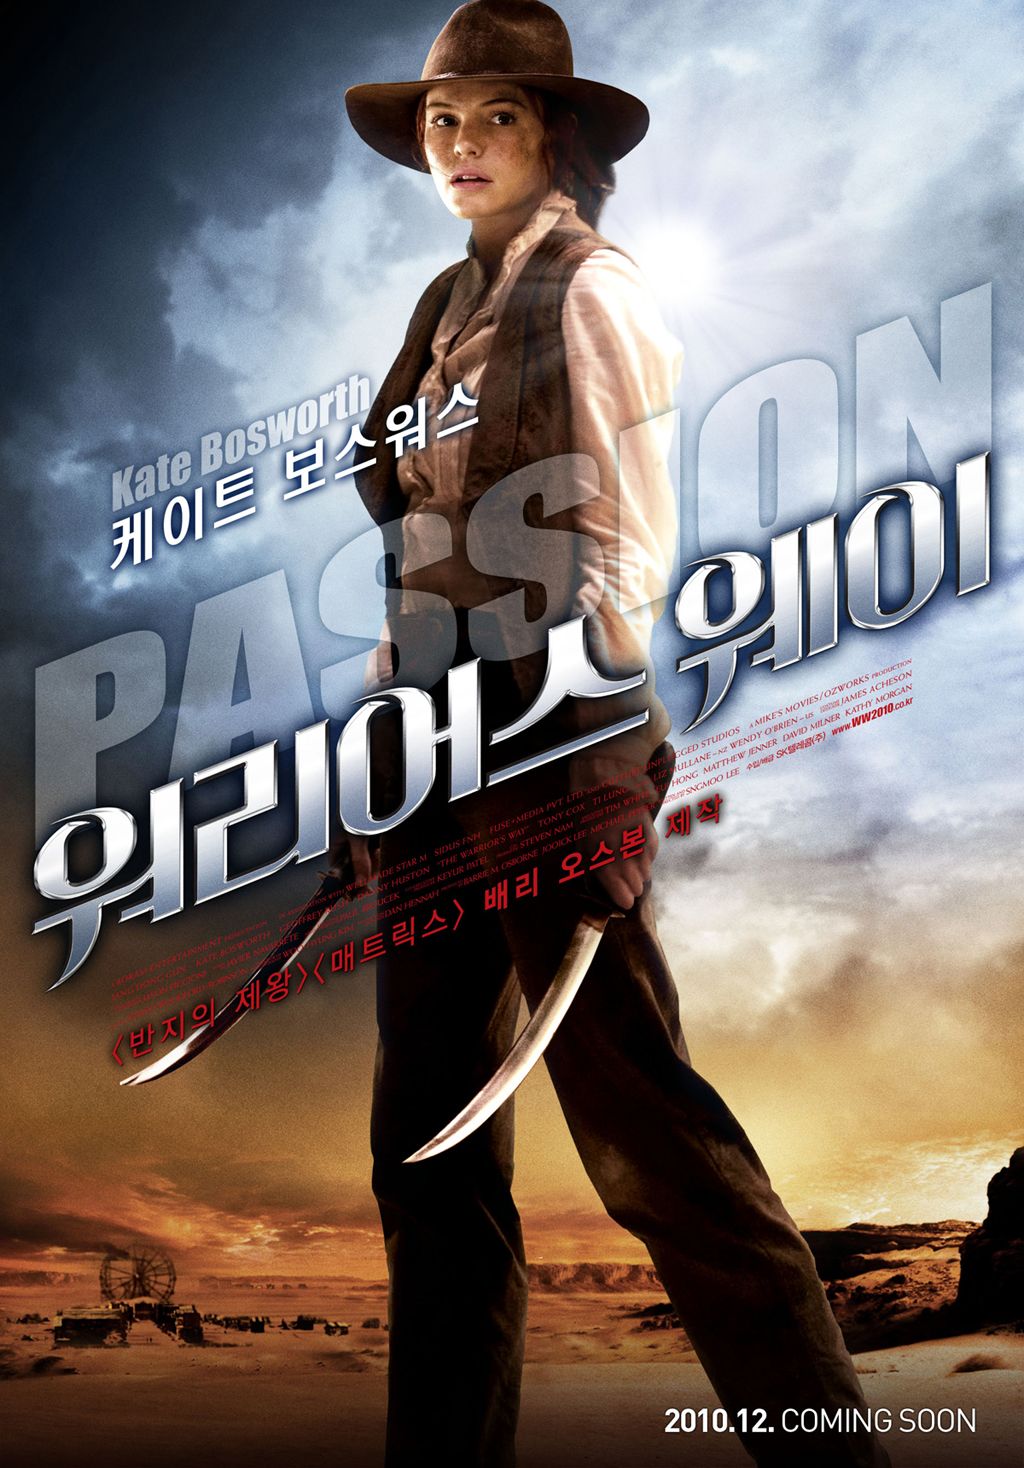 Poster of Rogue Pictures' The Warrior's Way (2010)